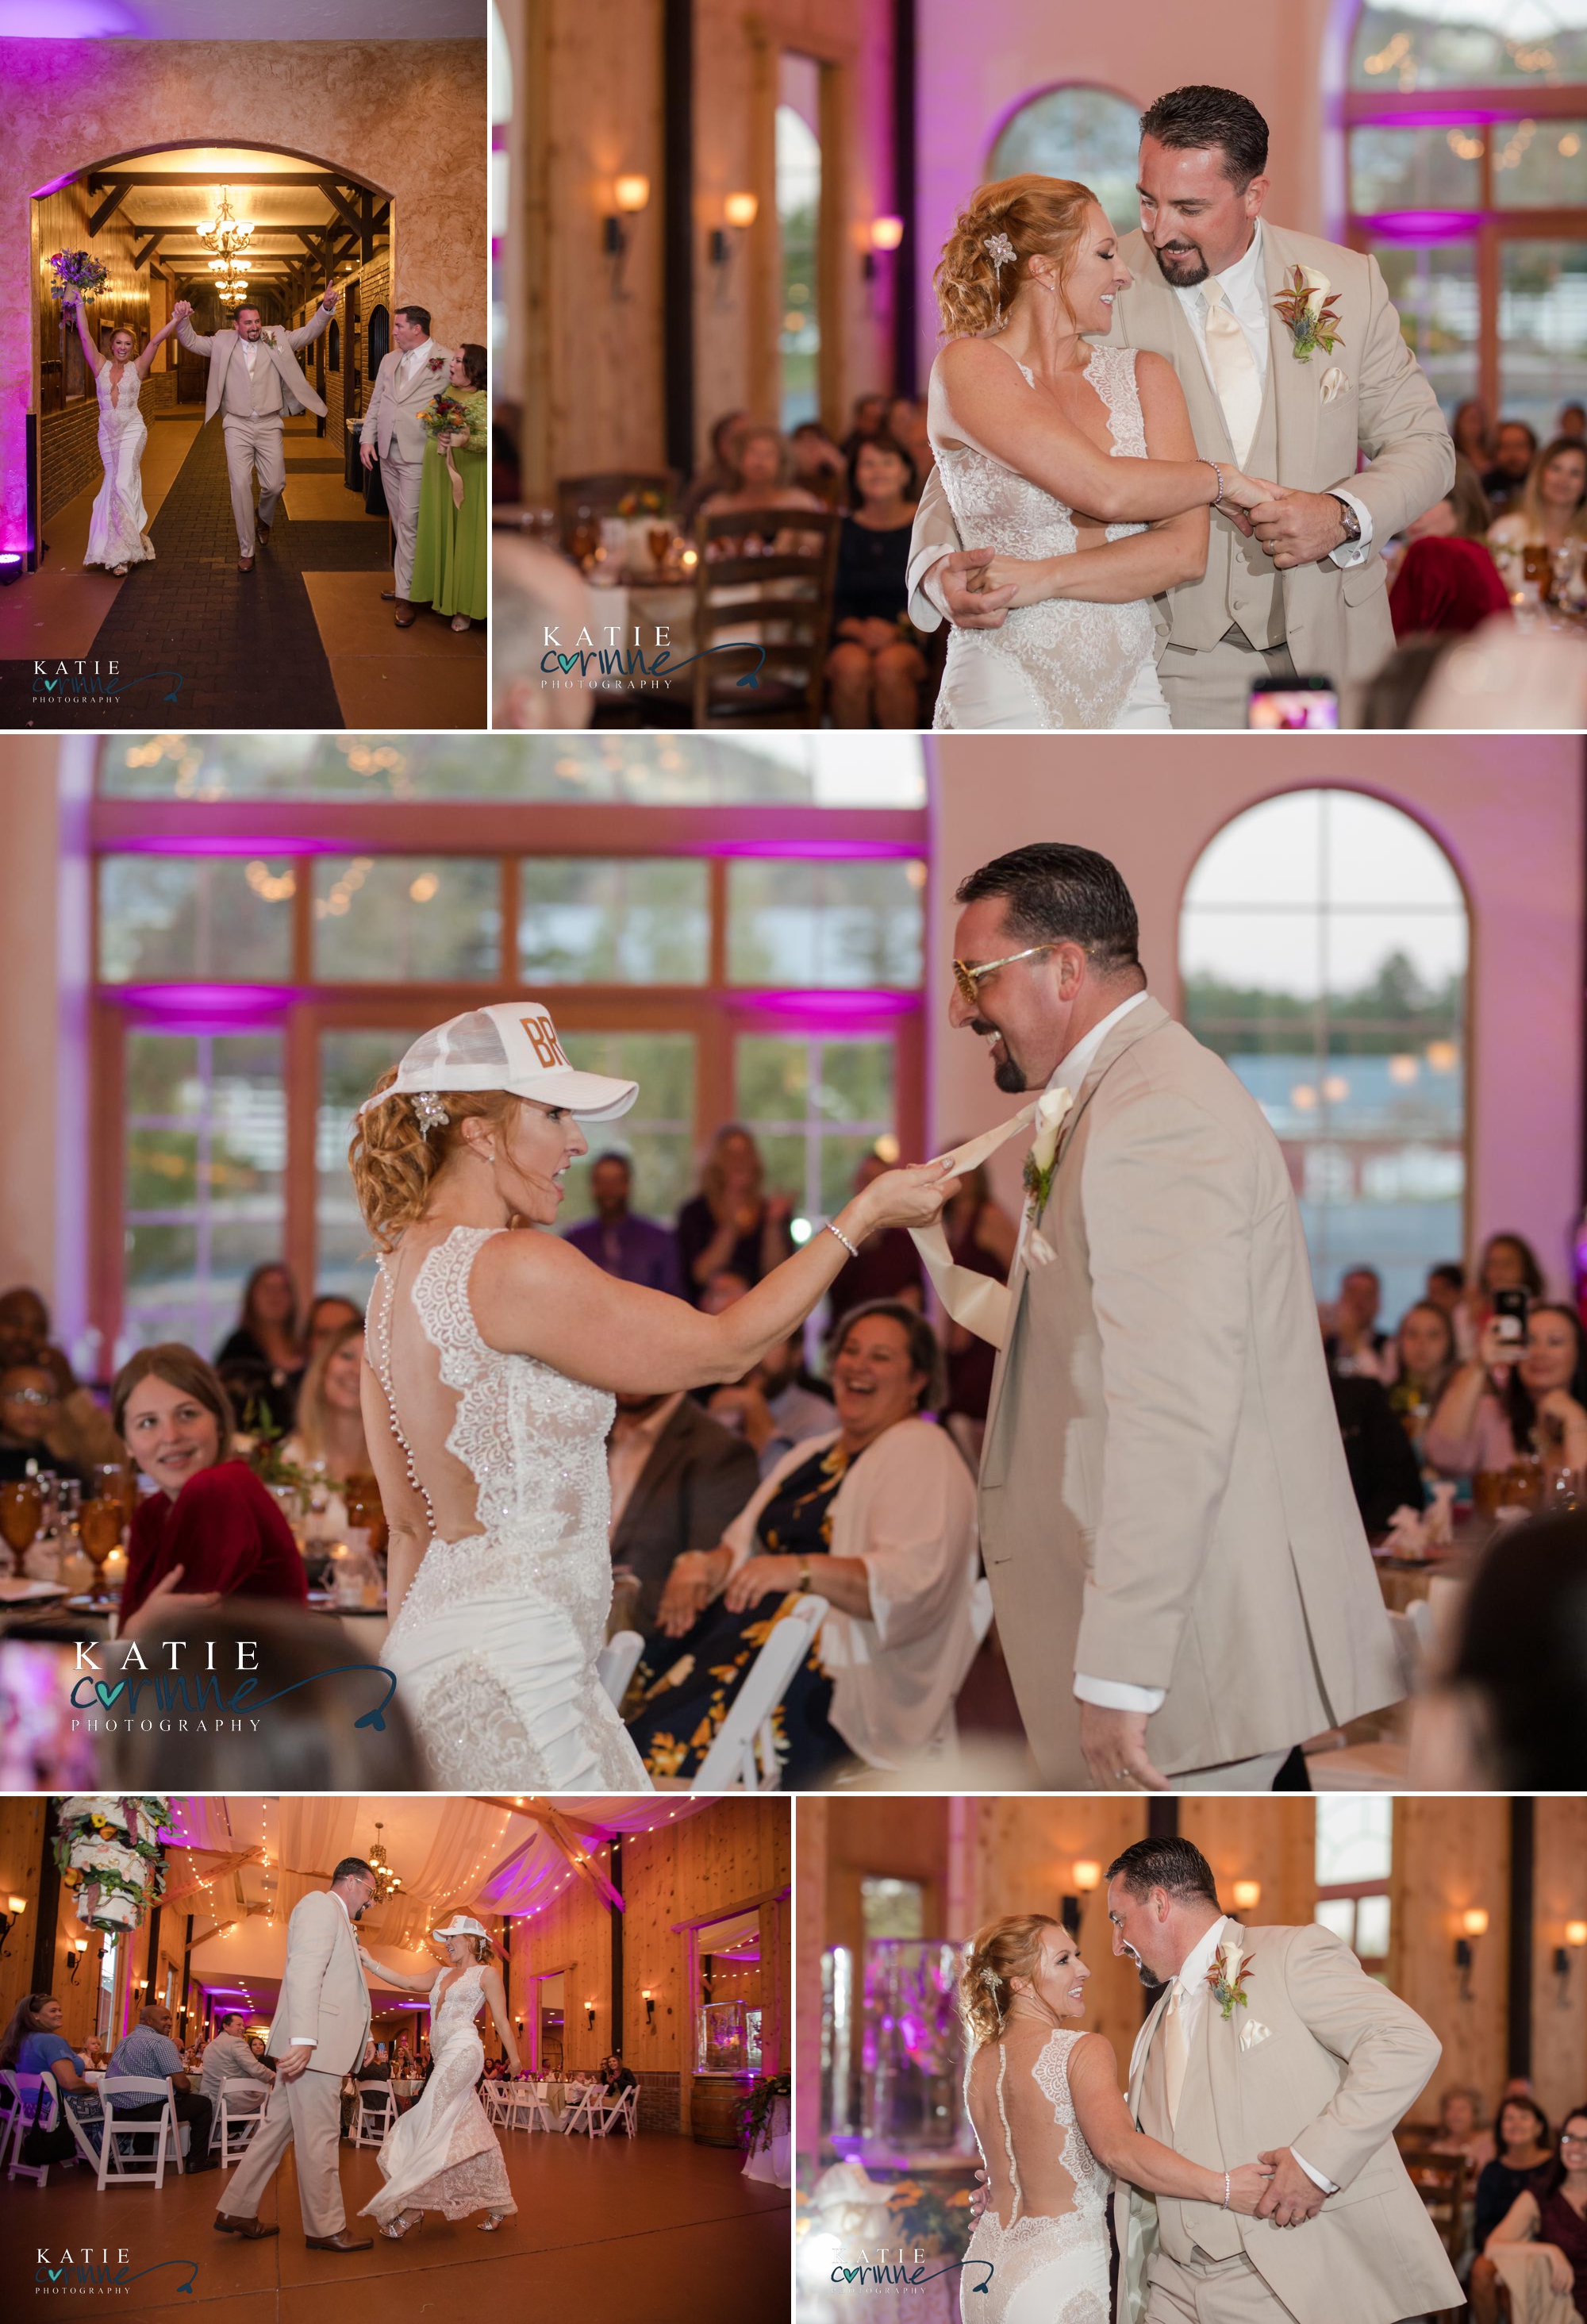 Bride and groom's first dance at Crooked Willow Farms